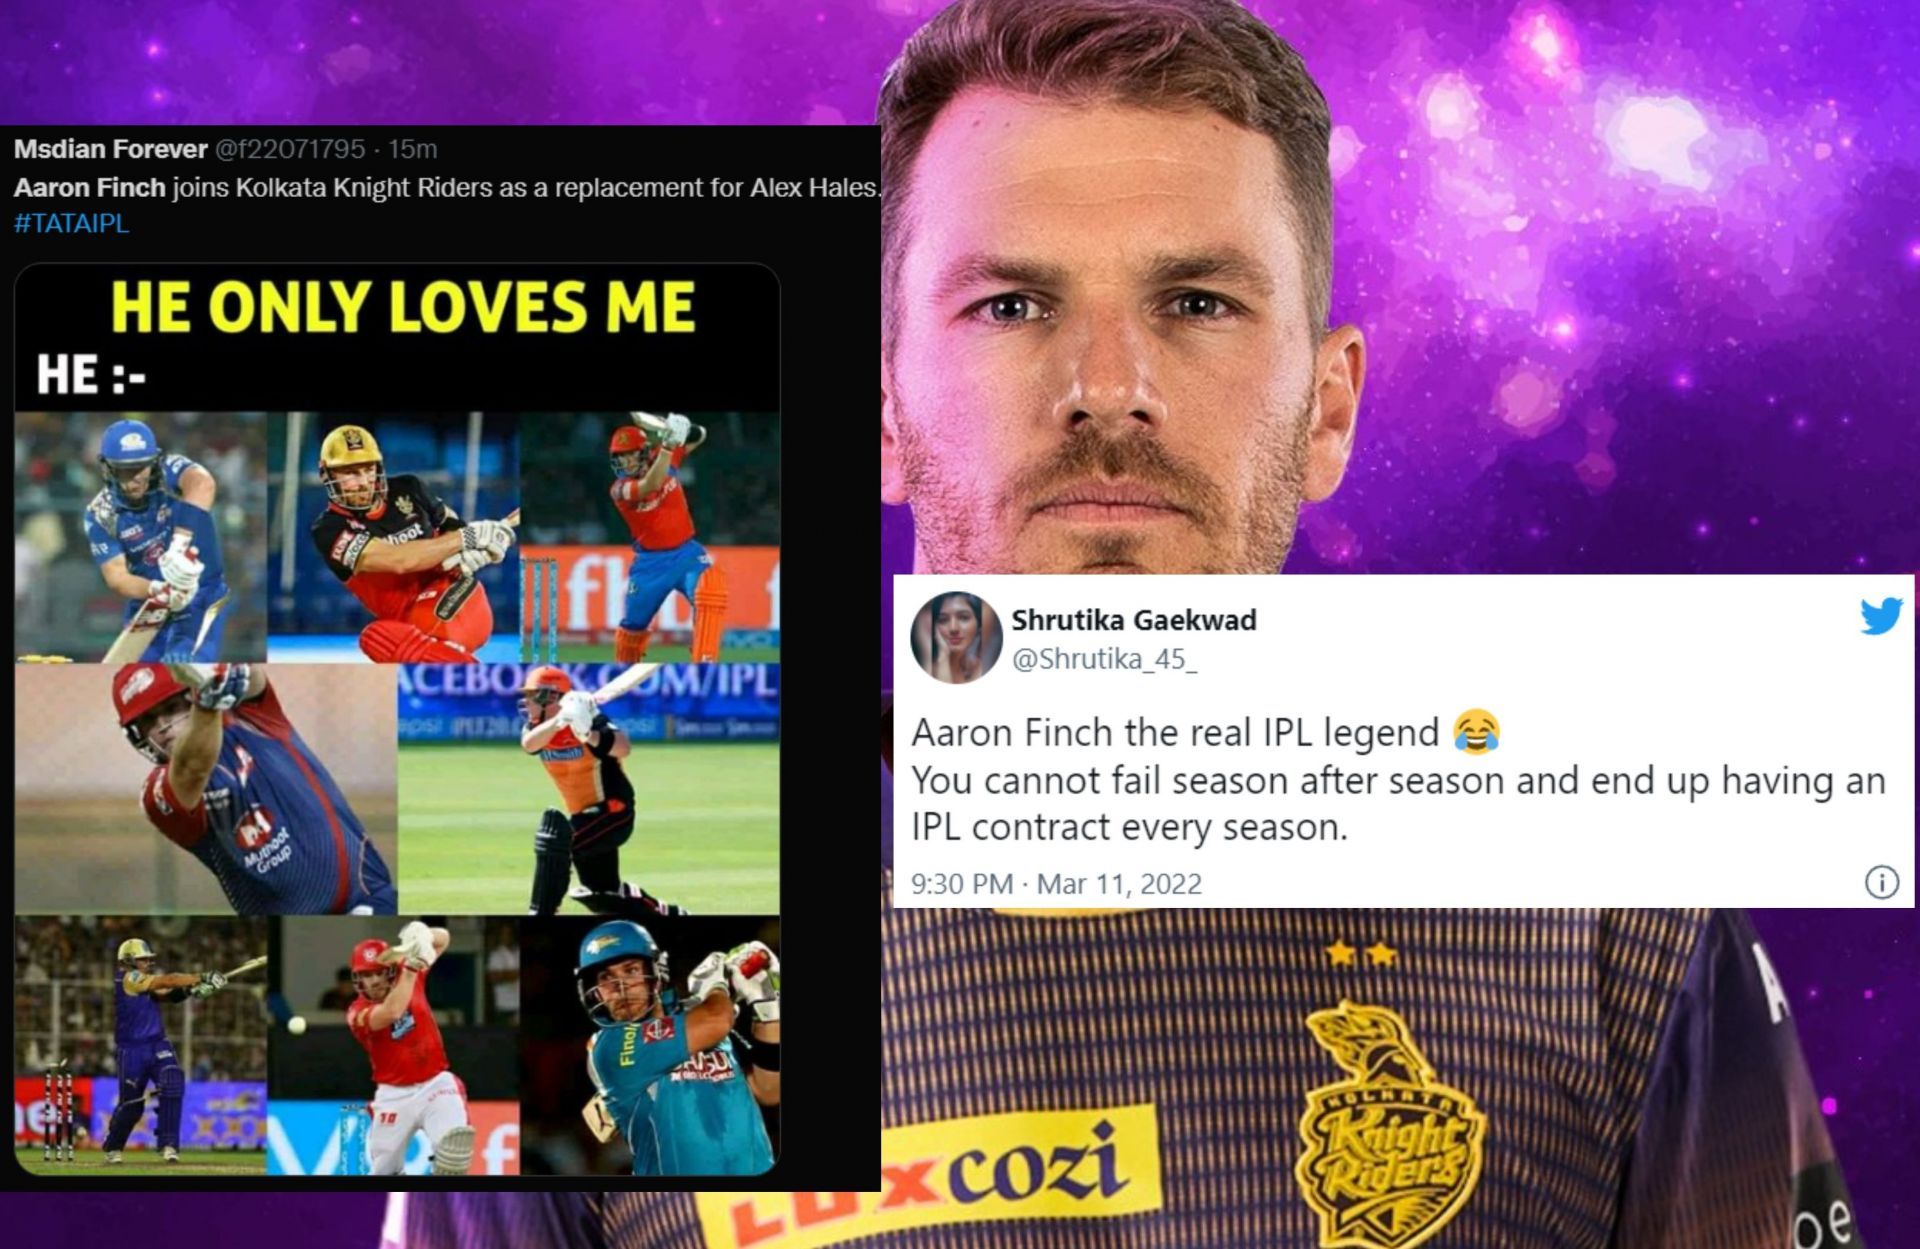 Fans roast Aaron Finch after KKR sign him as a replacement for Alex Hales.